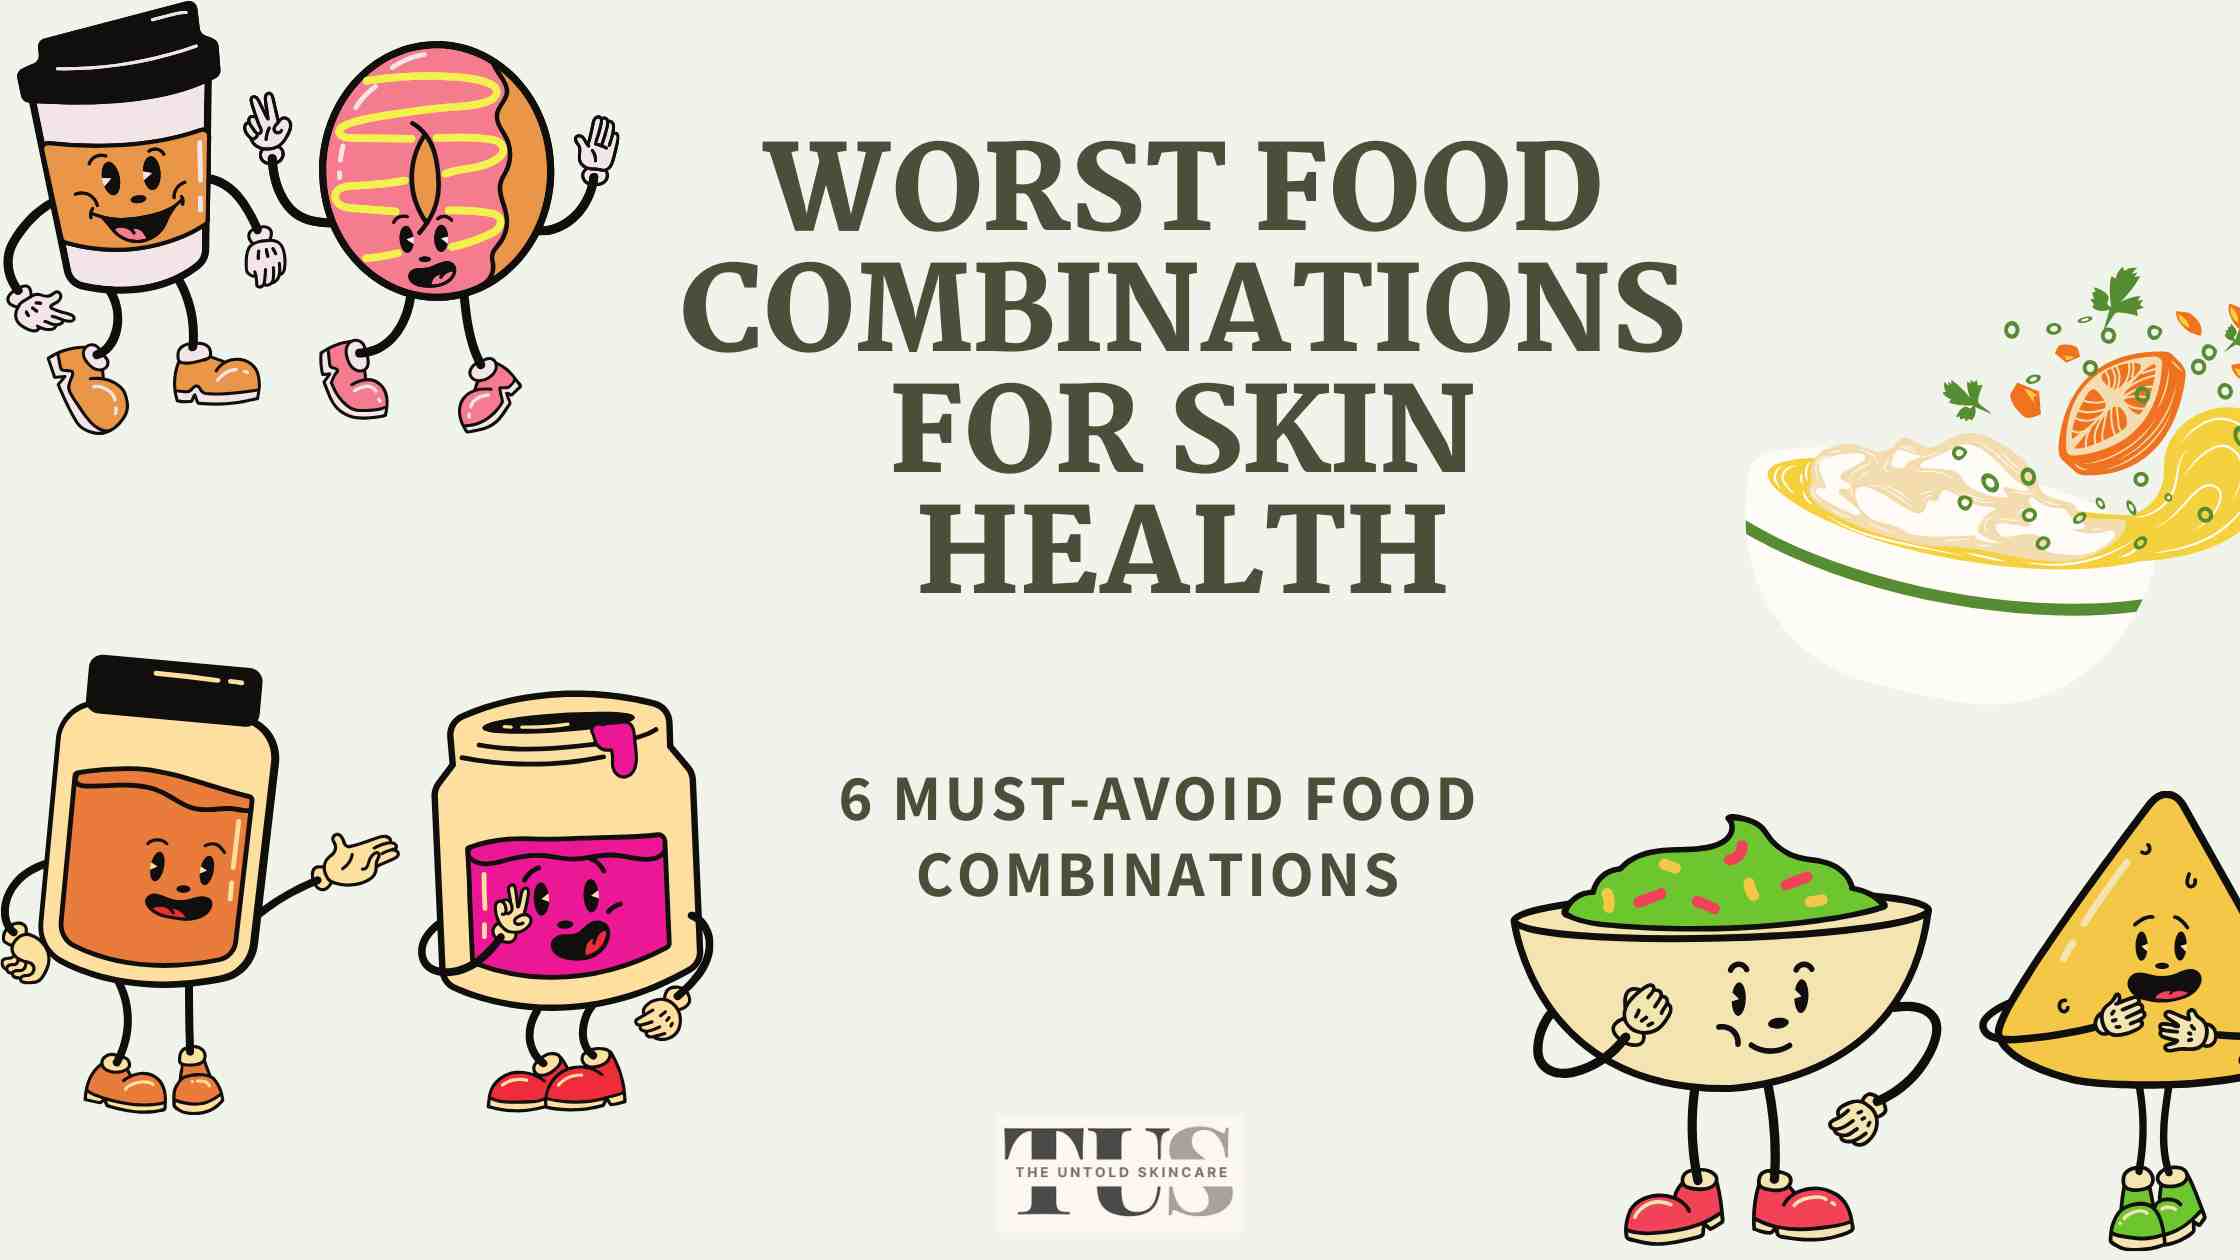 6 Worst Food Combinations for Skin and Overall Health